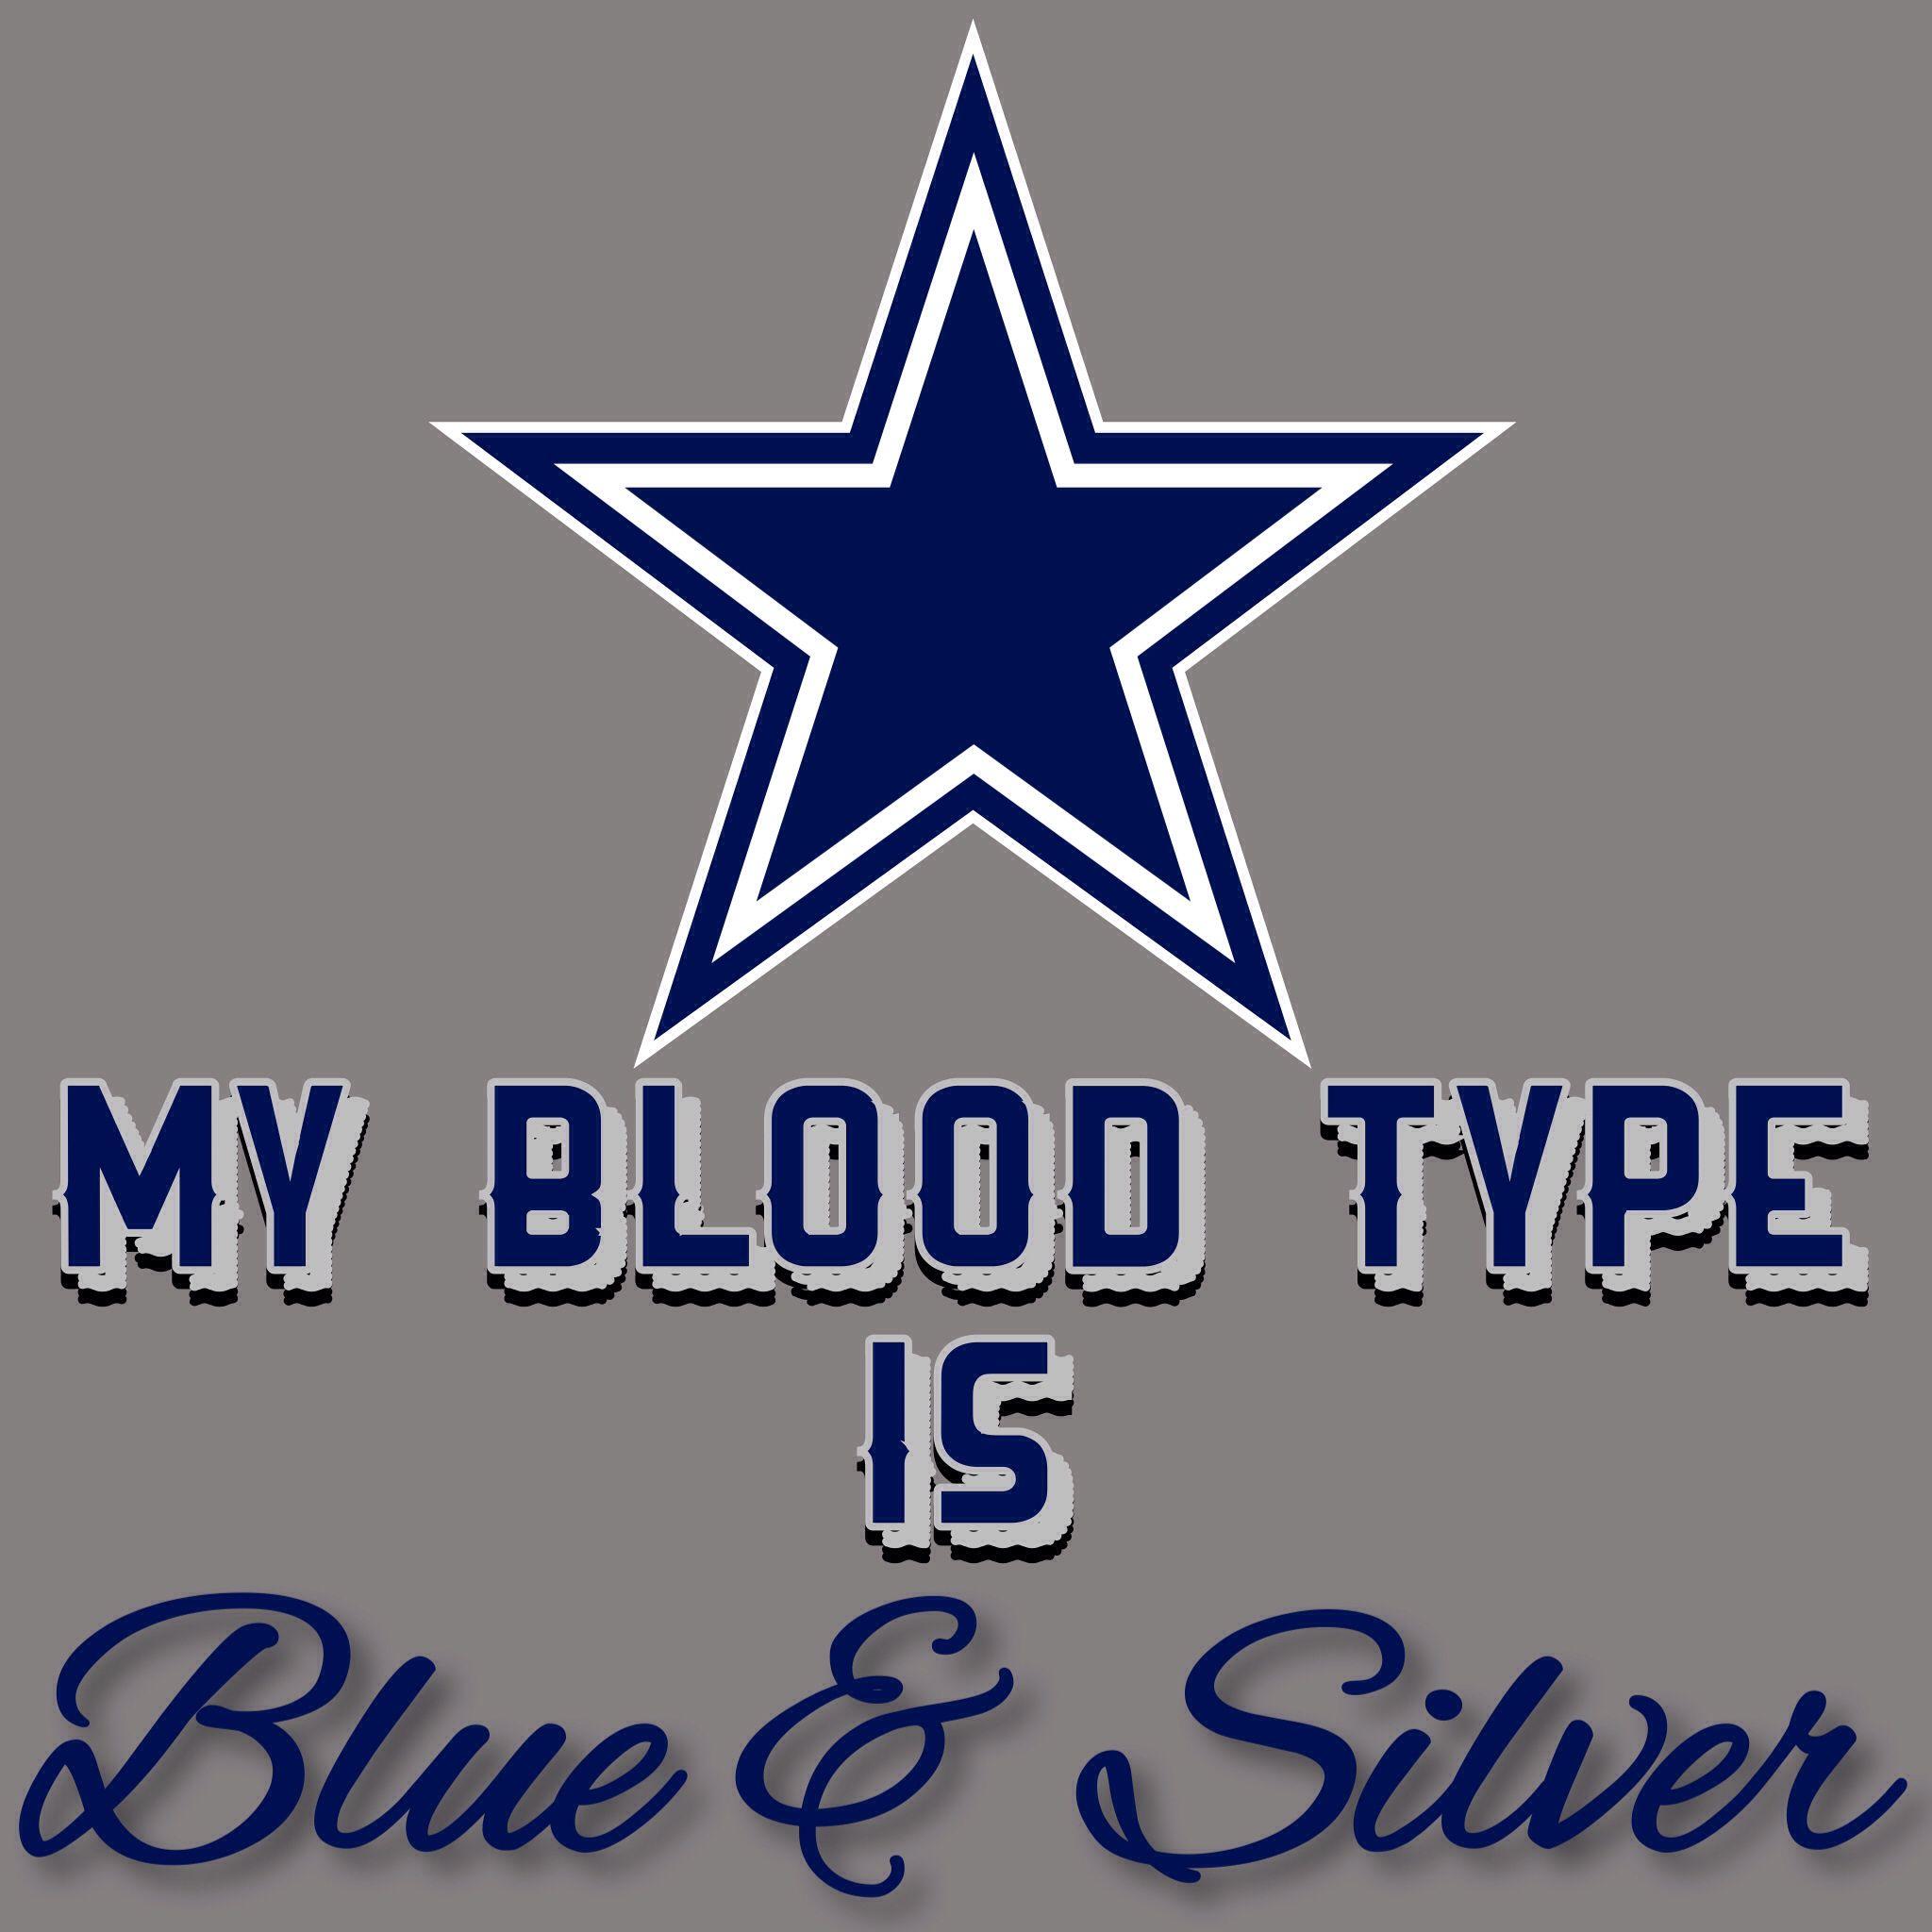 NFL Cowboys Logo - My Blood Type Is Blue & Silver Dallas Cowboys. Dallas Cowboys